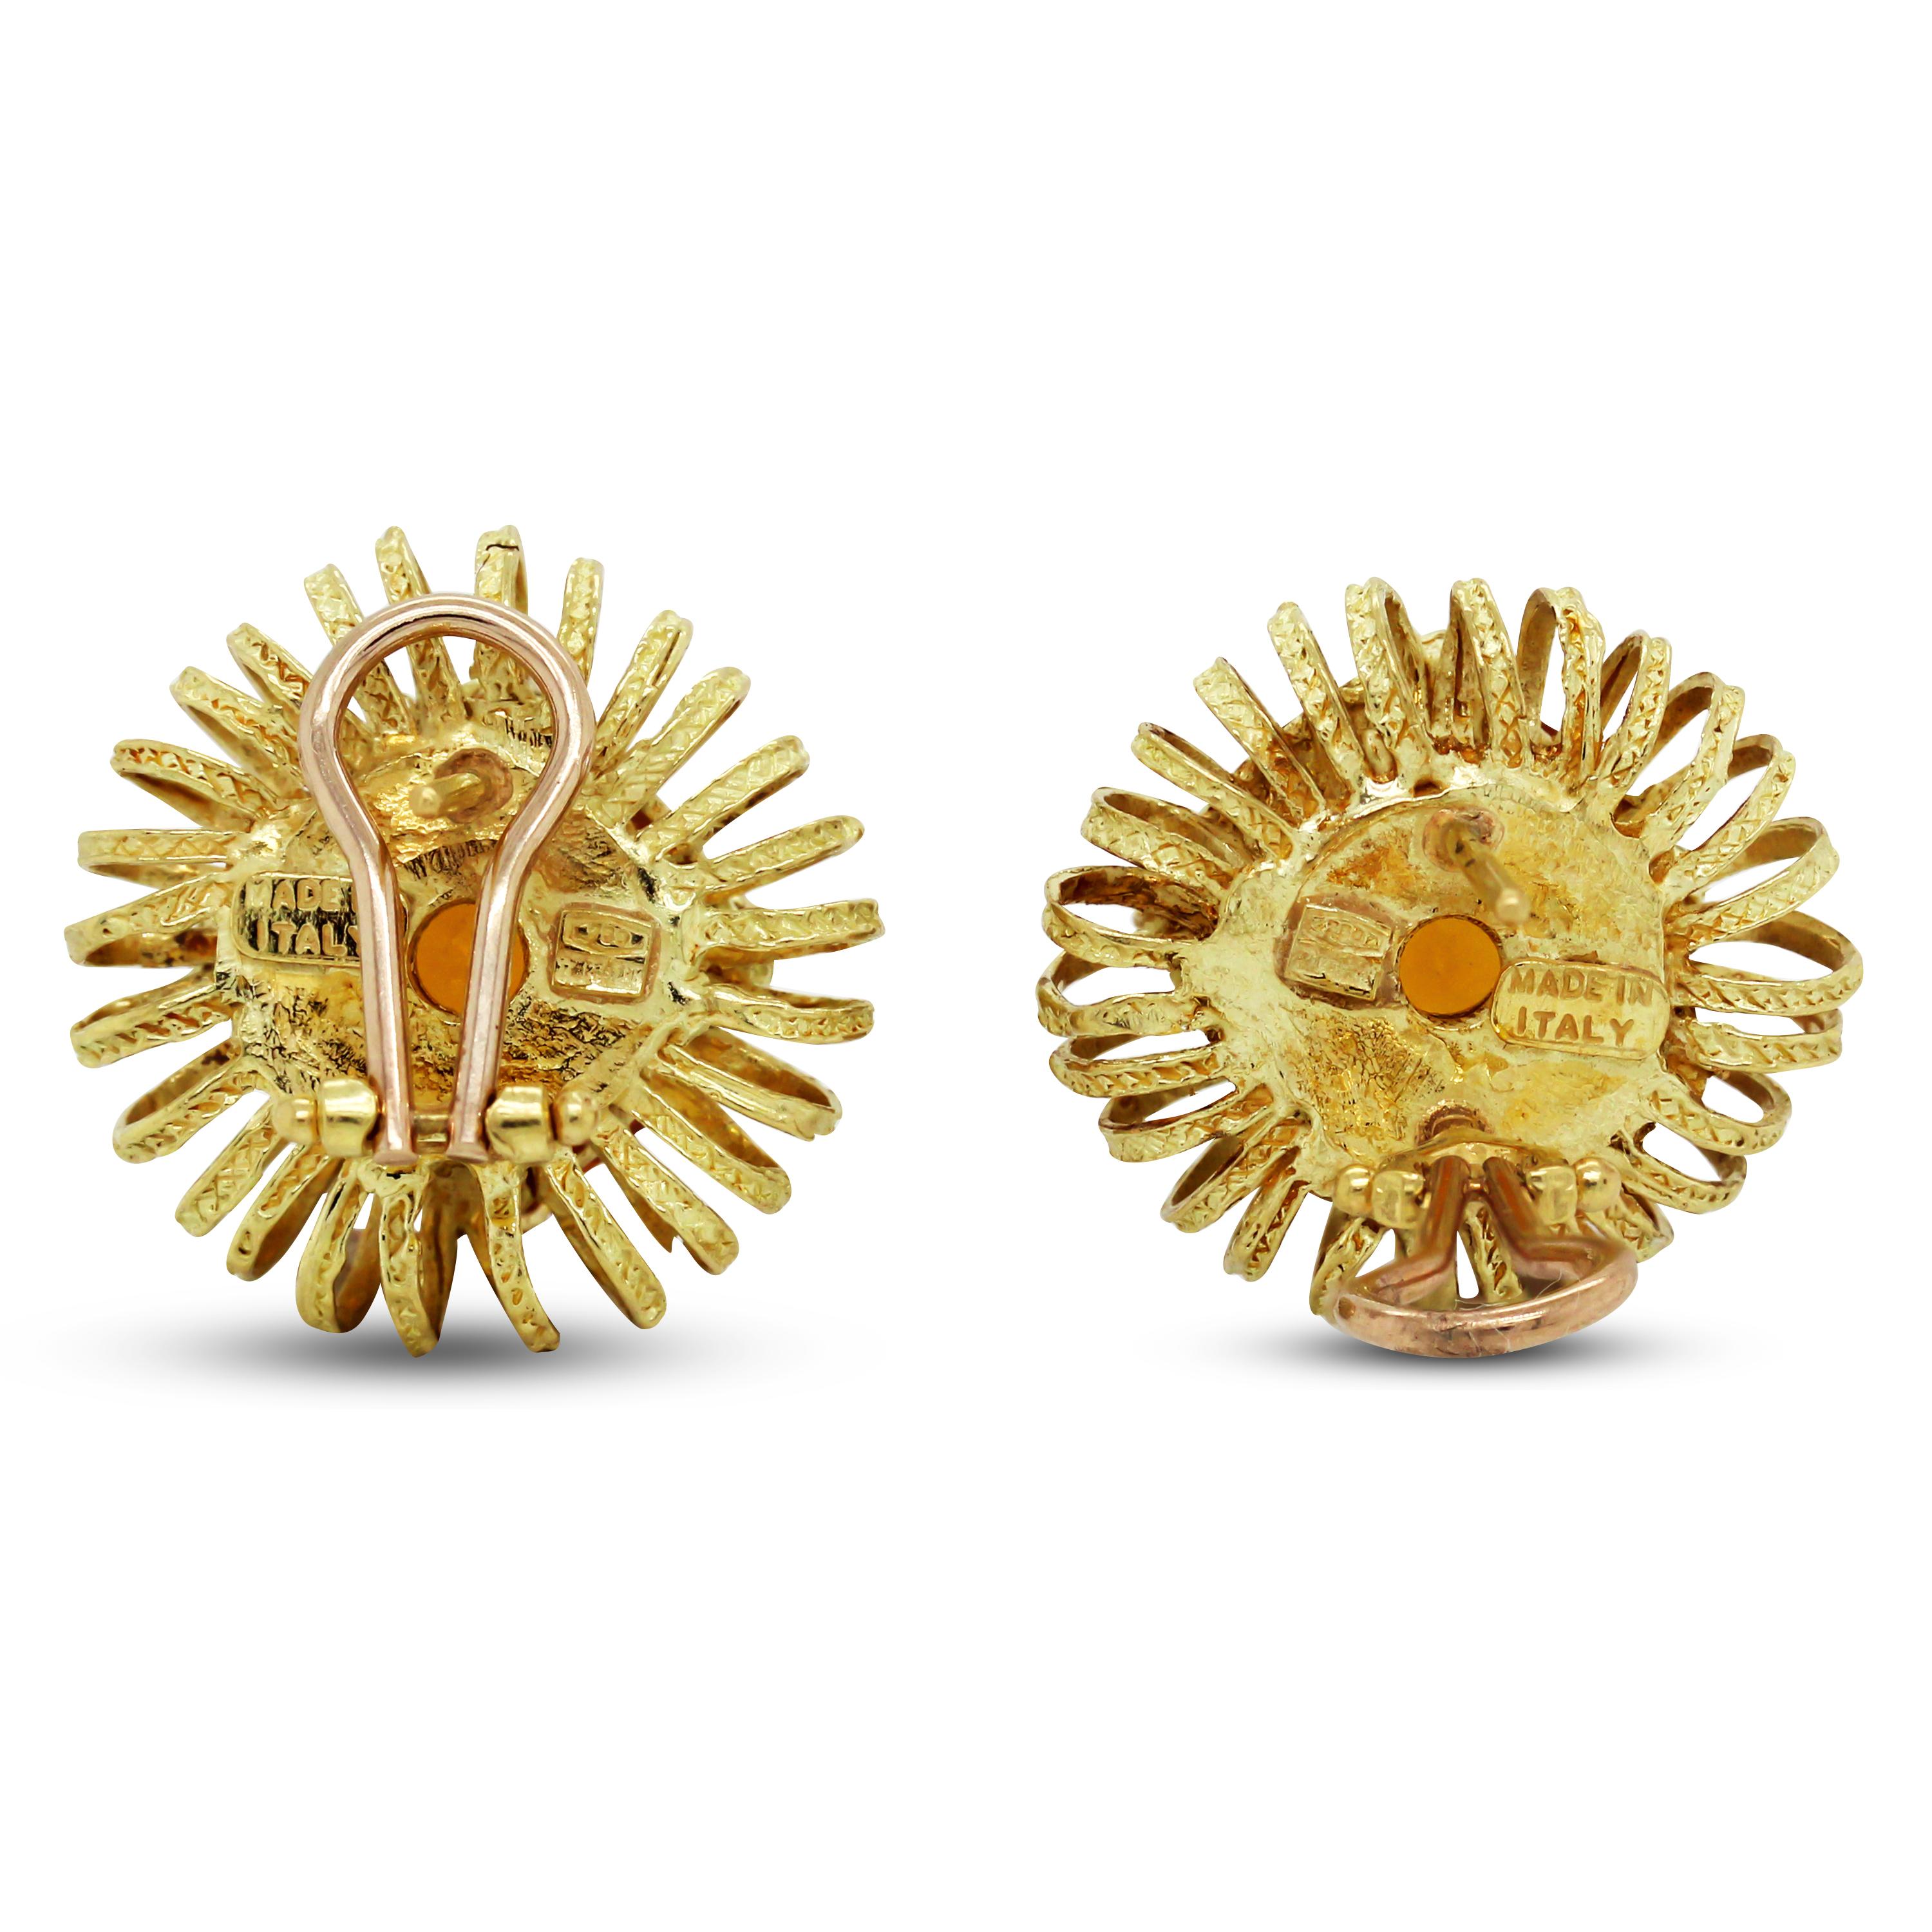 18K Yellow Gold Starburst Floral Stud Earrings with Citrine Centers

This unique pair of earrings feature a gorgeous,  twisted-like design surrounding the edges of the earring

Apprx. 35 carat Citrine total weight

Earrings are 0.95 inch in